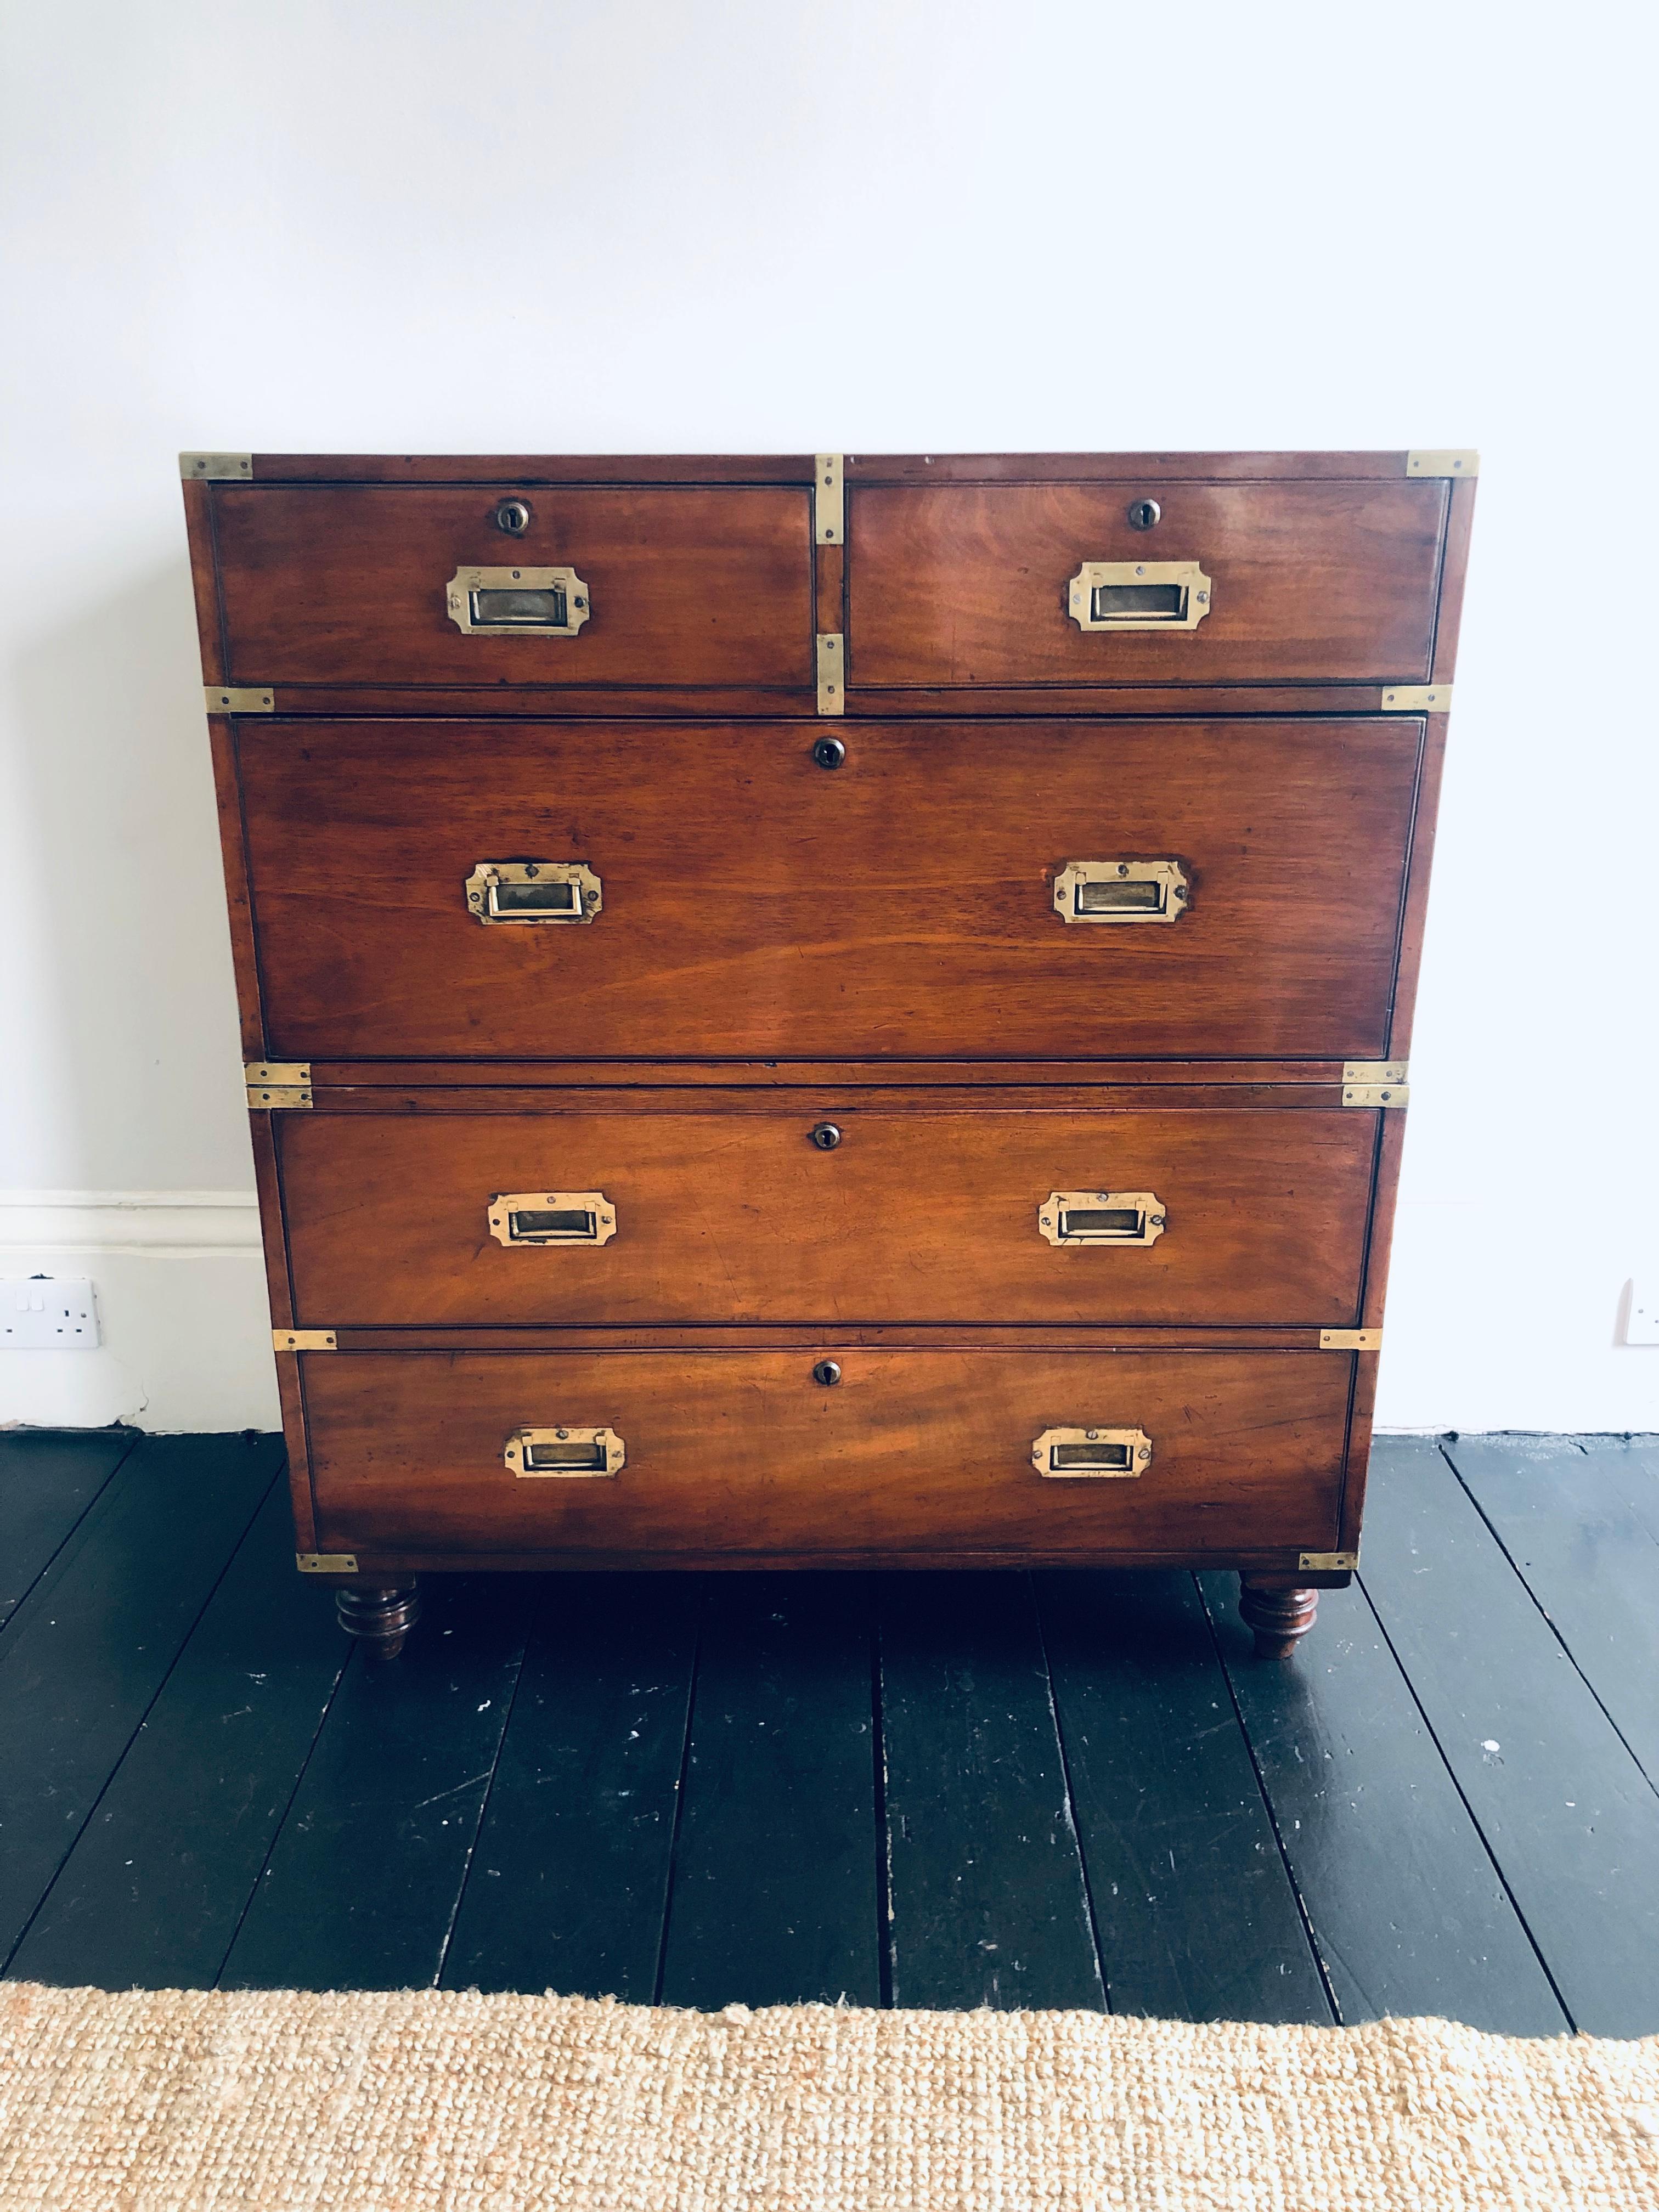 A 19 century English mahogany and brass bound campaign chest in two sections with turned supports
With solid mahogany drawer fronts and ash linings and original brass work throughout. The turned supports are later but 19th century.
 